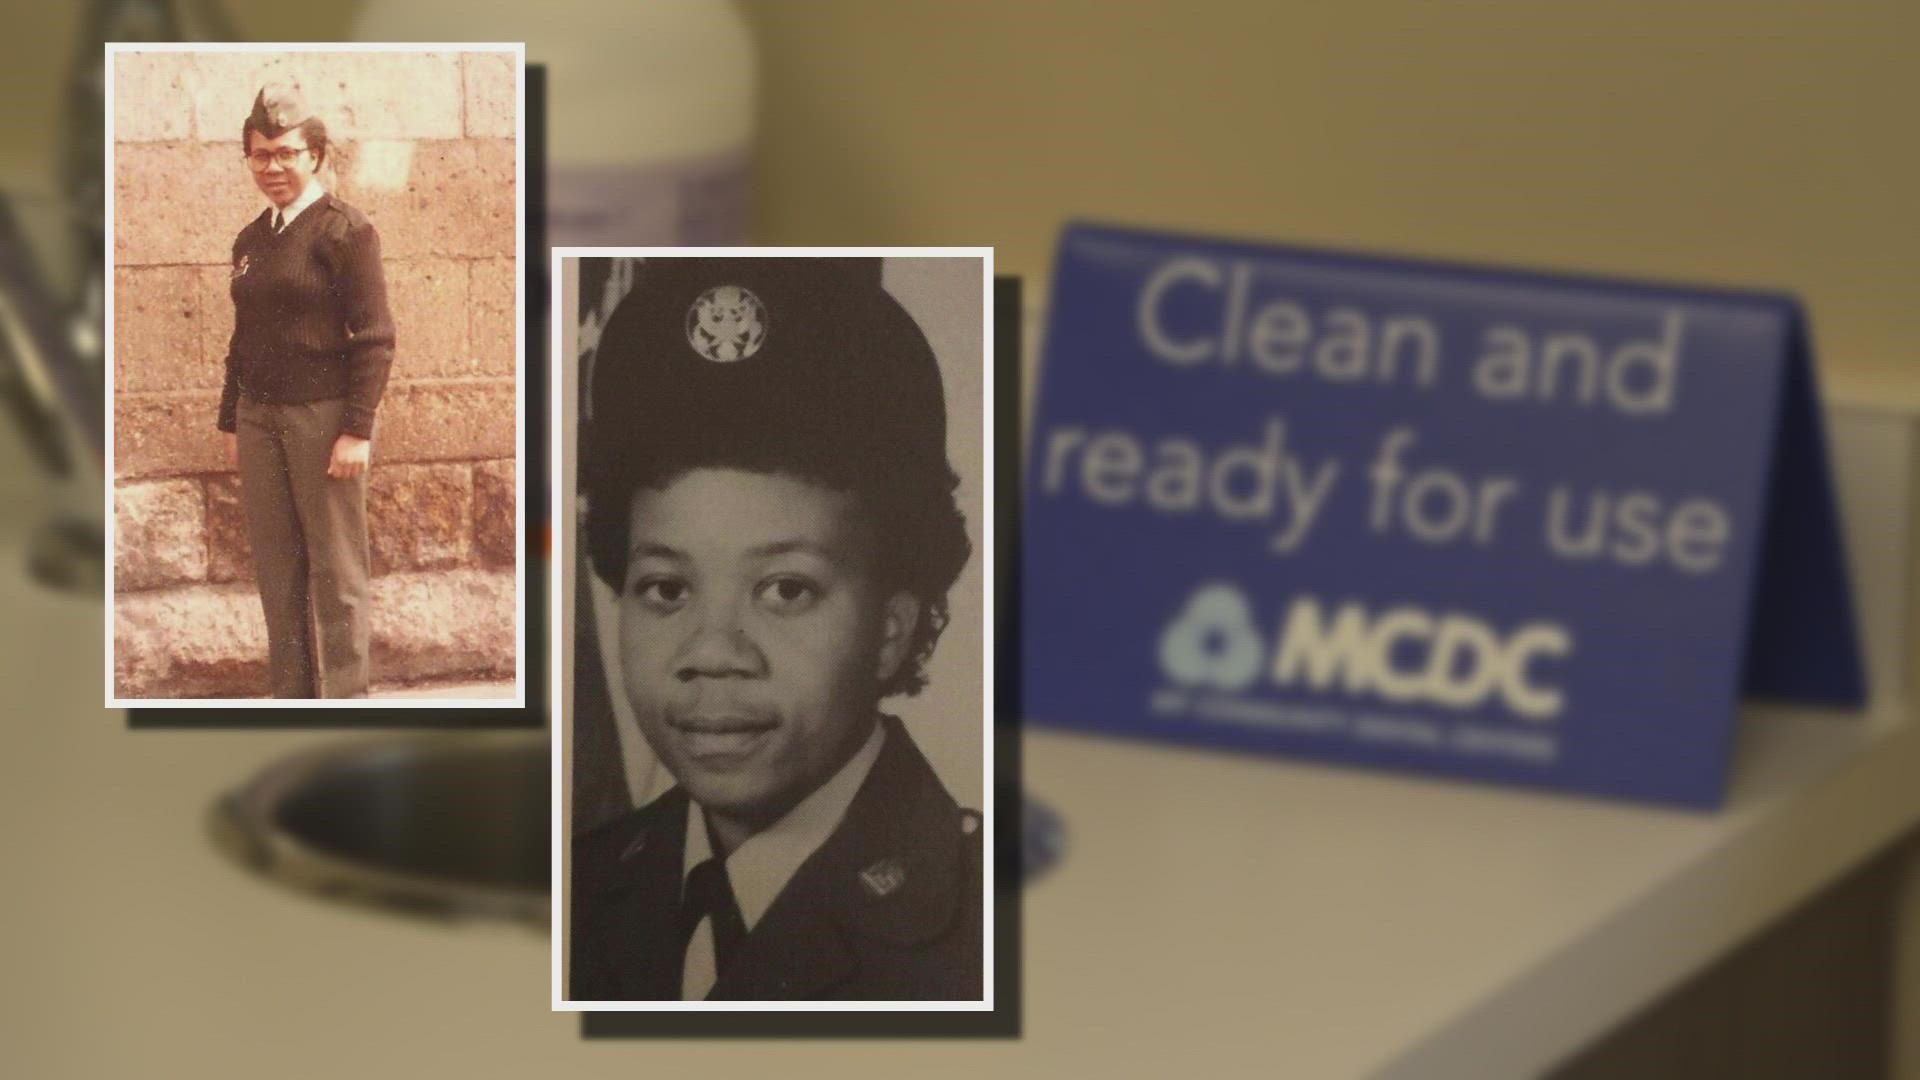 Dr. Deborah Brown served in the U.S. Army from 1984 to 1986. Upon discharge, she struggled to get dental insurance. She now makes sure vets get the care they need.